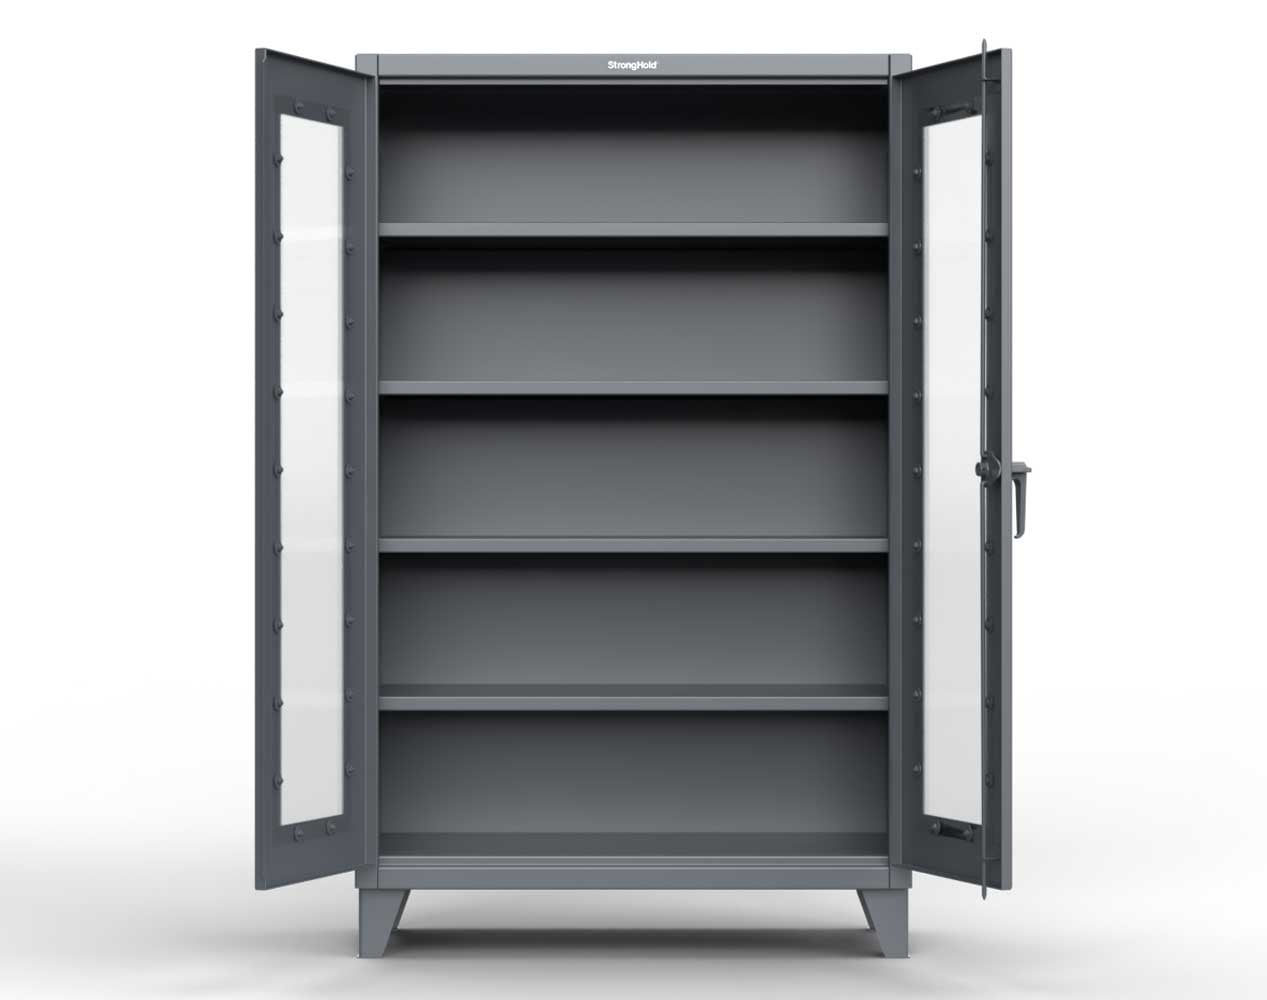 Extreme Duty 12 GA Scratch Resistant clearview Cabinet with 4 Shelves - 60 In. W x 24 In. D x 78 In. H